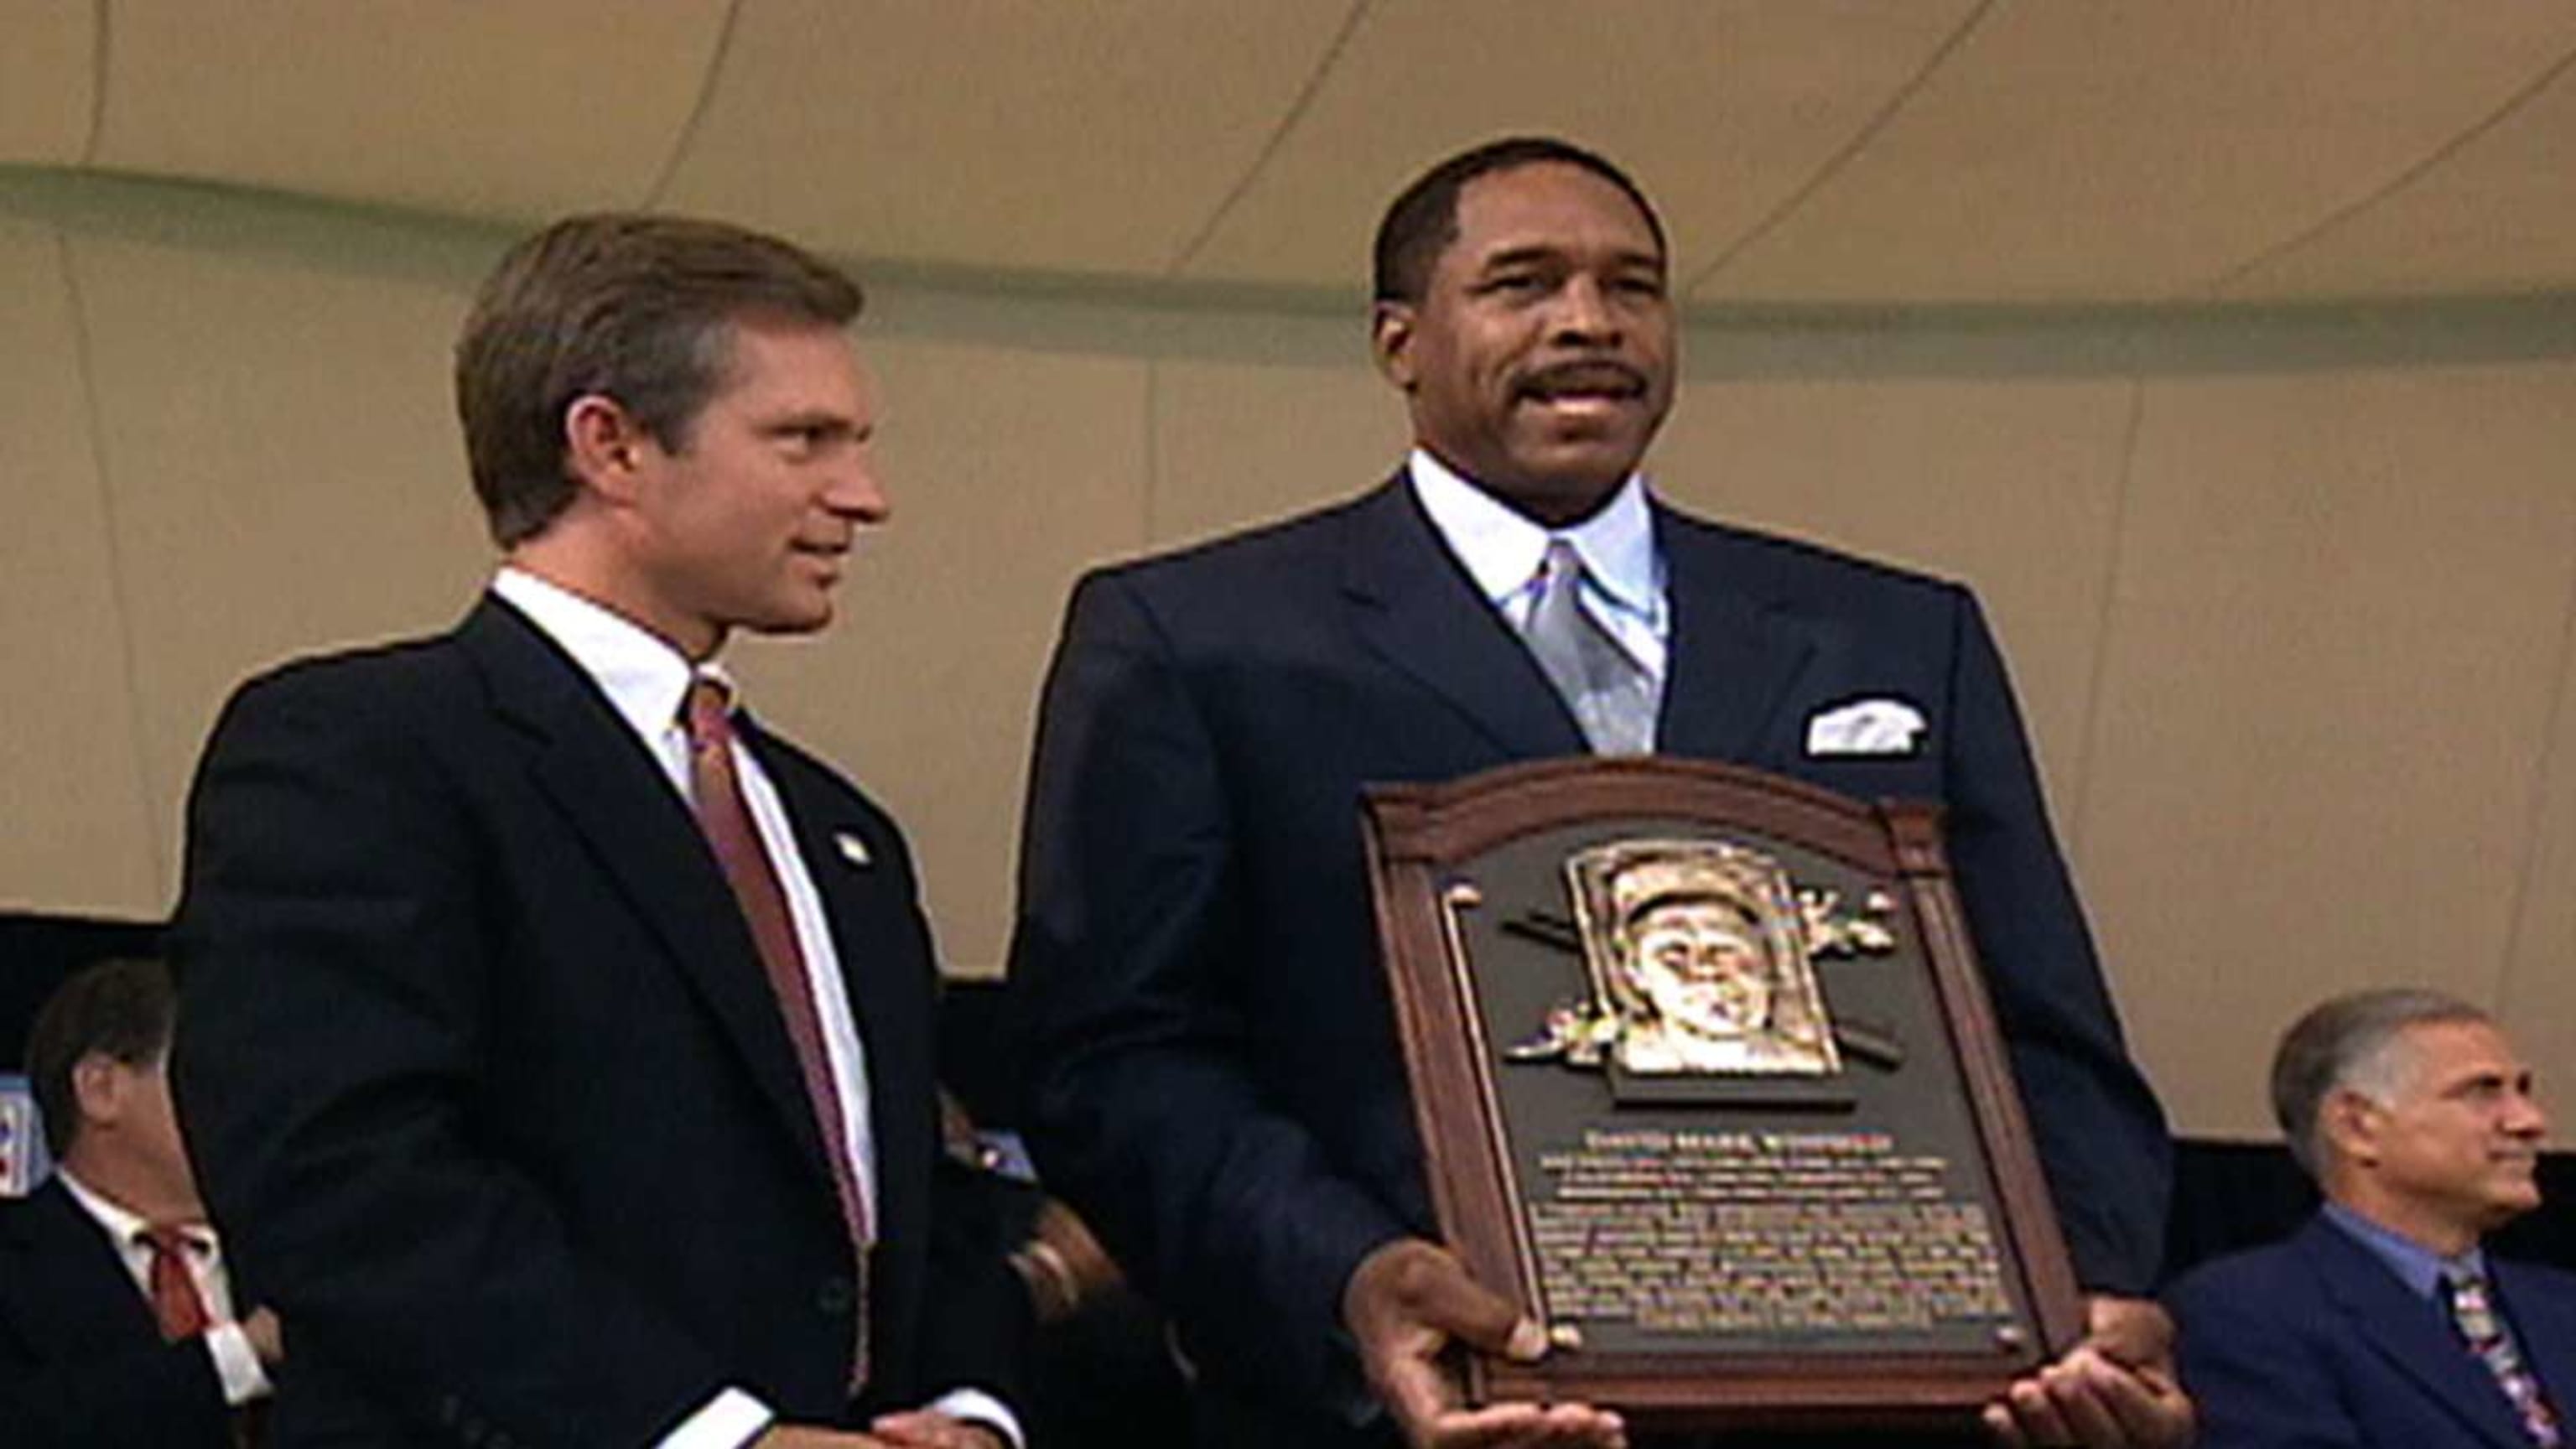 Dave Winfield's top career moments